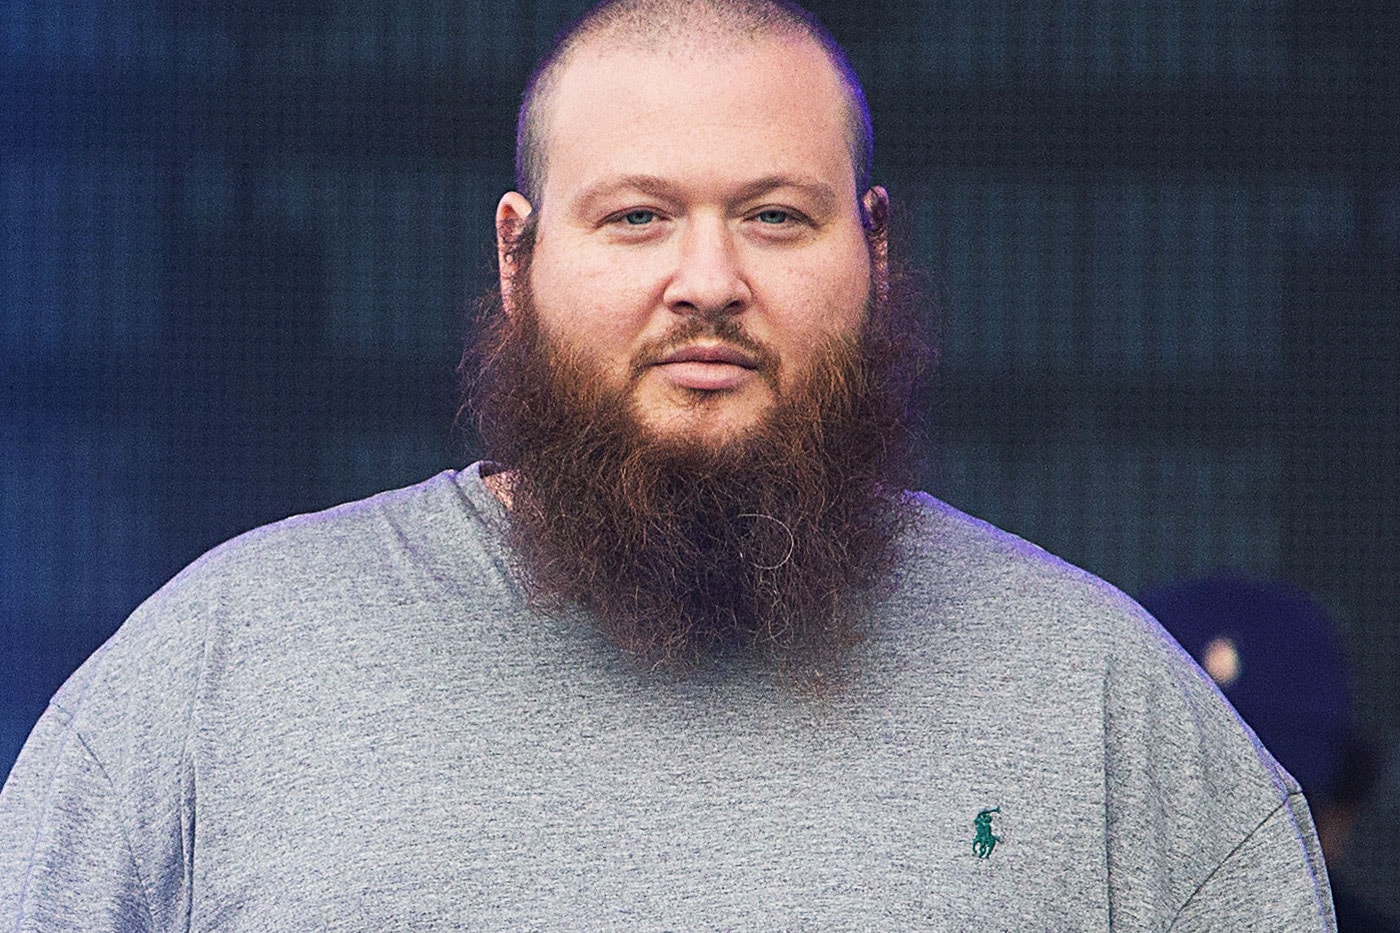 Action Bronson Leaves Stage Mid-Set & Cancels Show for "Medical Reasons"